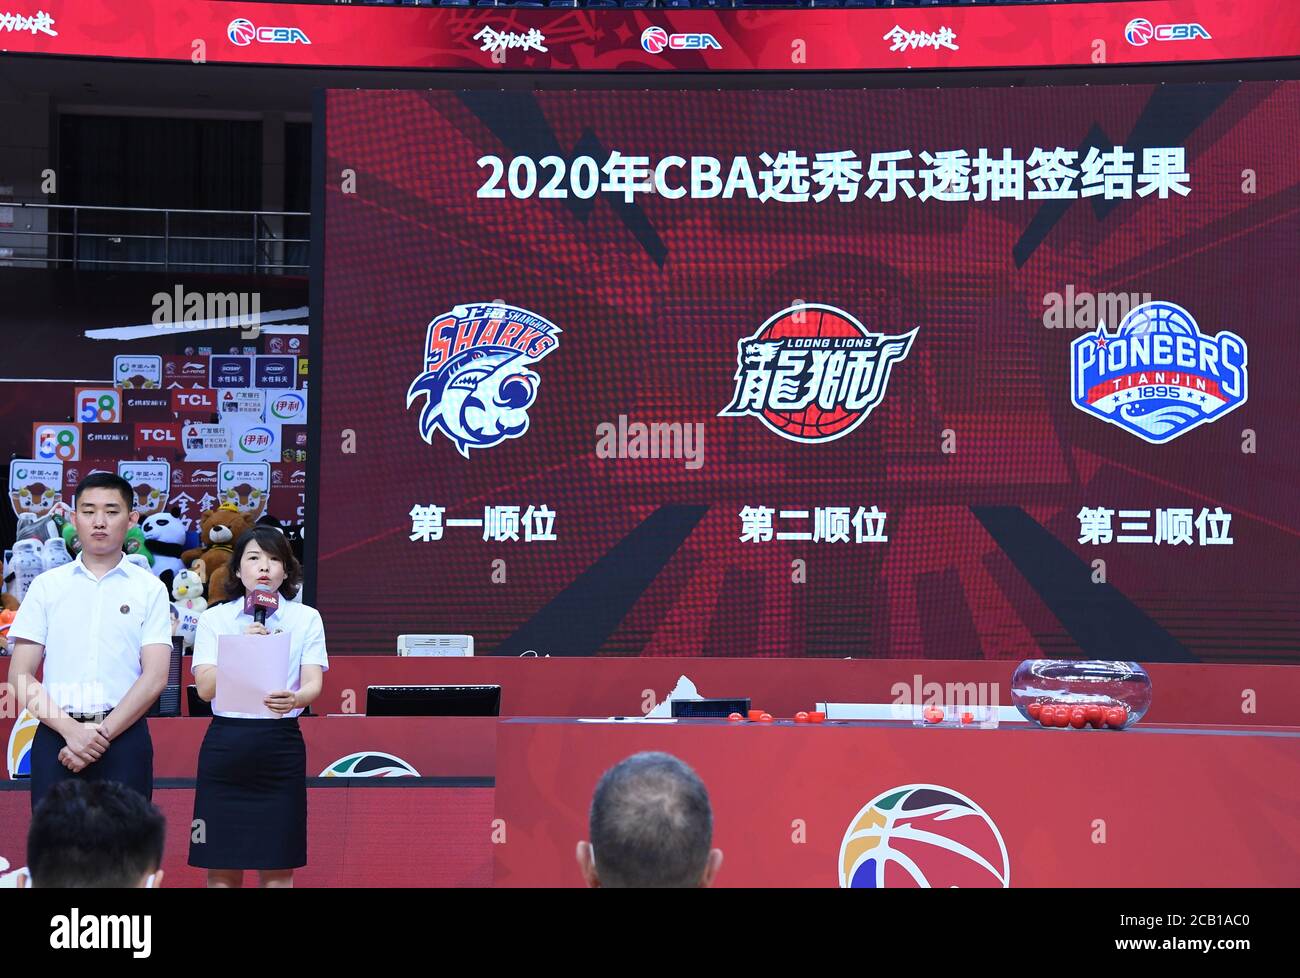 Qingdao. 10th Aug, 2020. Notaries announce the drawing result of the 2020 CBA draft lottery ceremony in Qingdao of east China's Shandong Province on Aug. 10, 2020. Shanghai Sharks won the first pick, Guangzhou Loong Lions and Tianjin Pioneers got the second and third pick respectively. Credit: Zhu Zheng/Xinhua/Alamy Live News Stock Photo